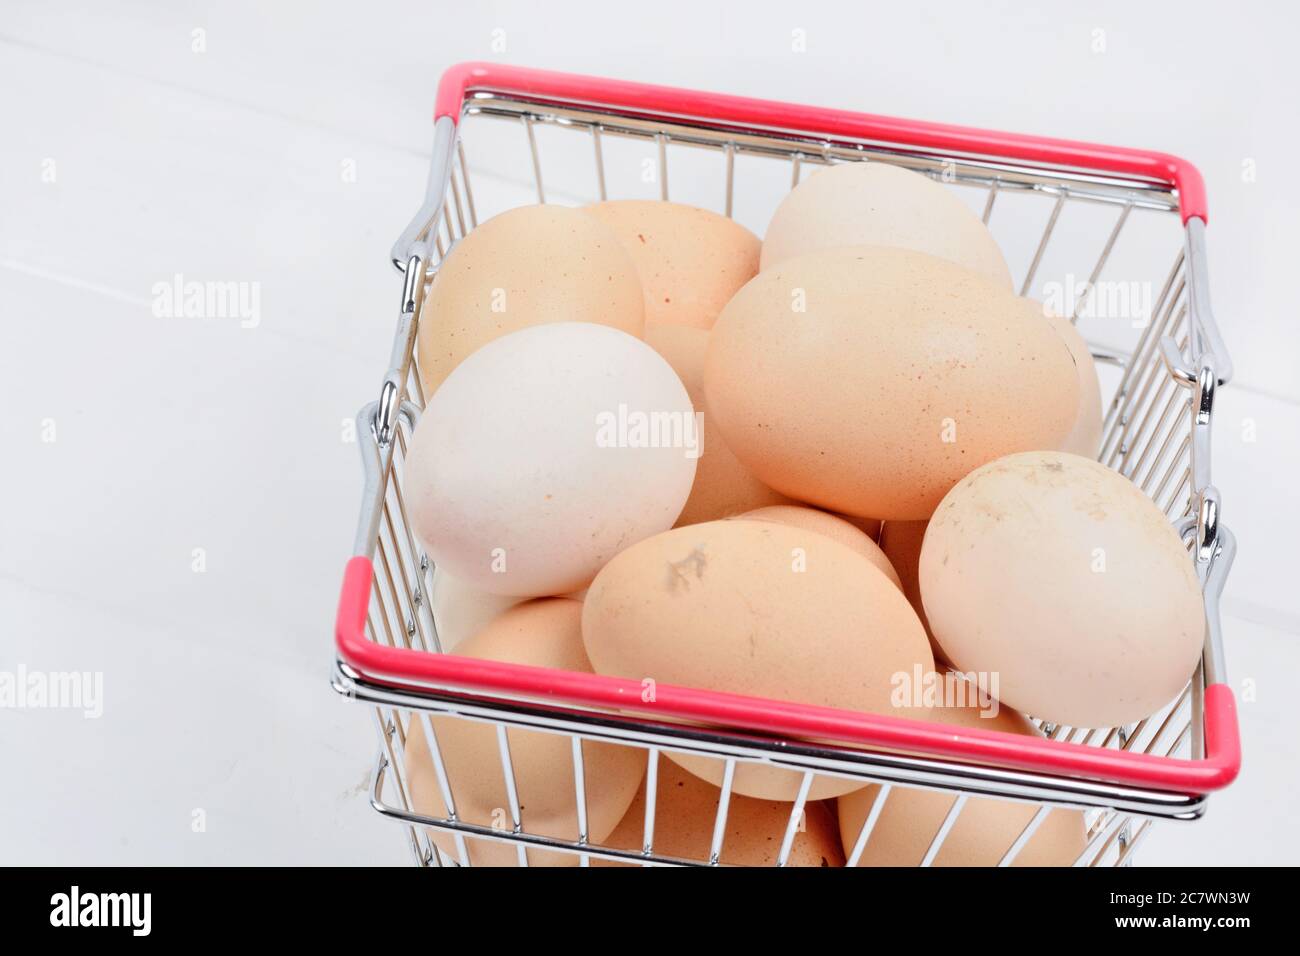 Group of eggs in a shopping cart on a wood table close-up Stock Photo